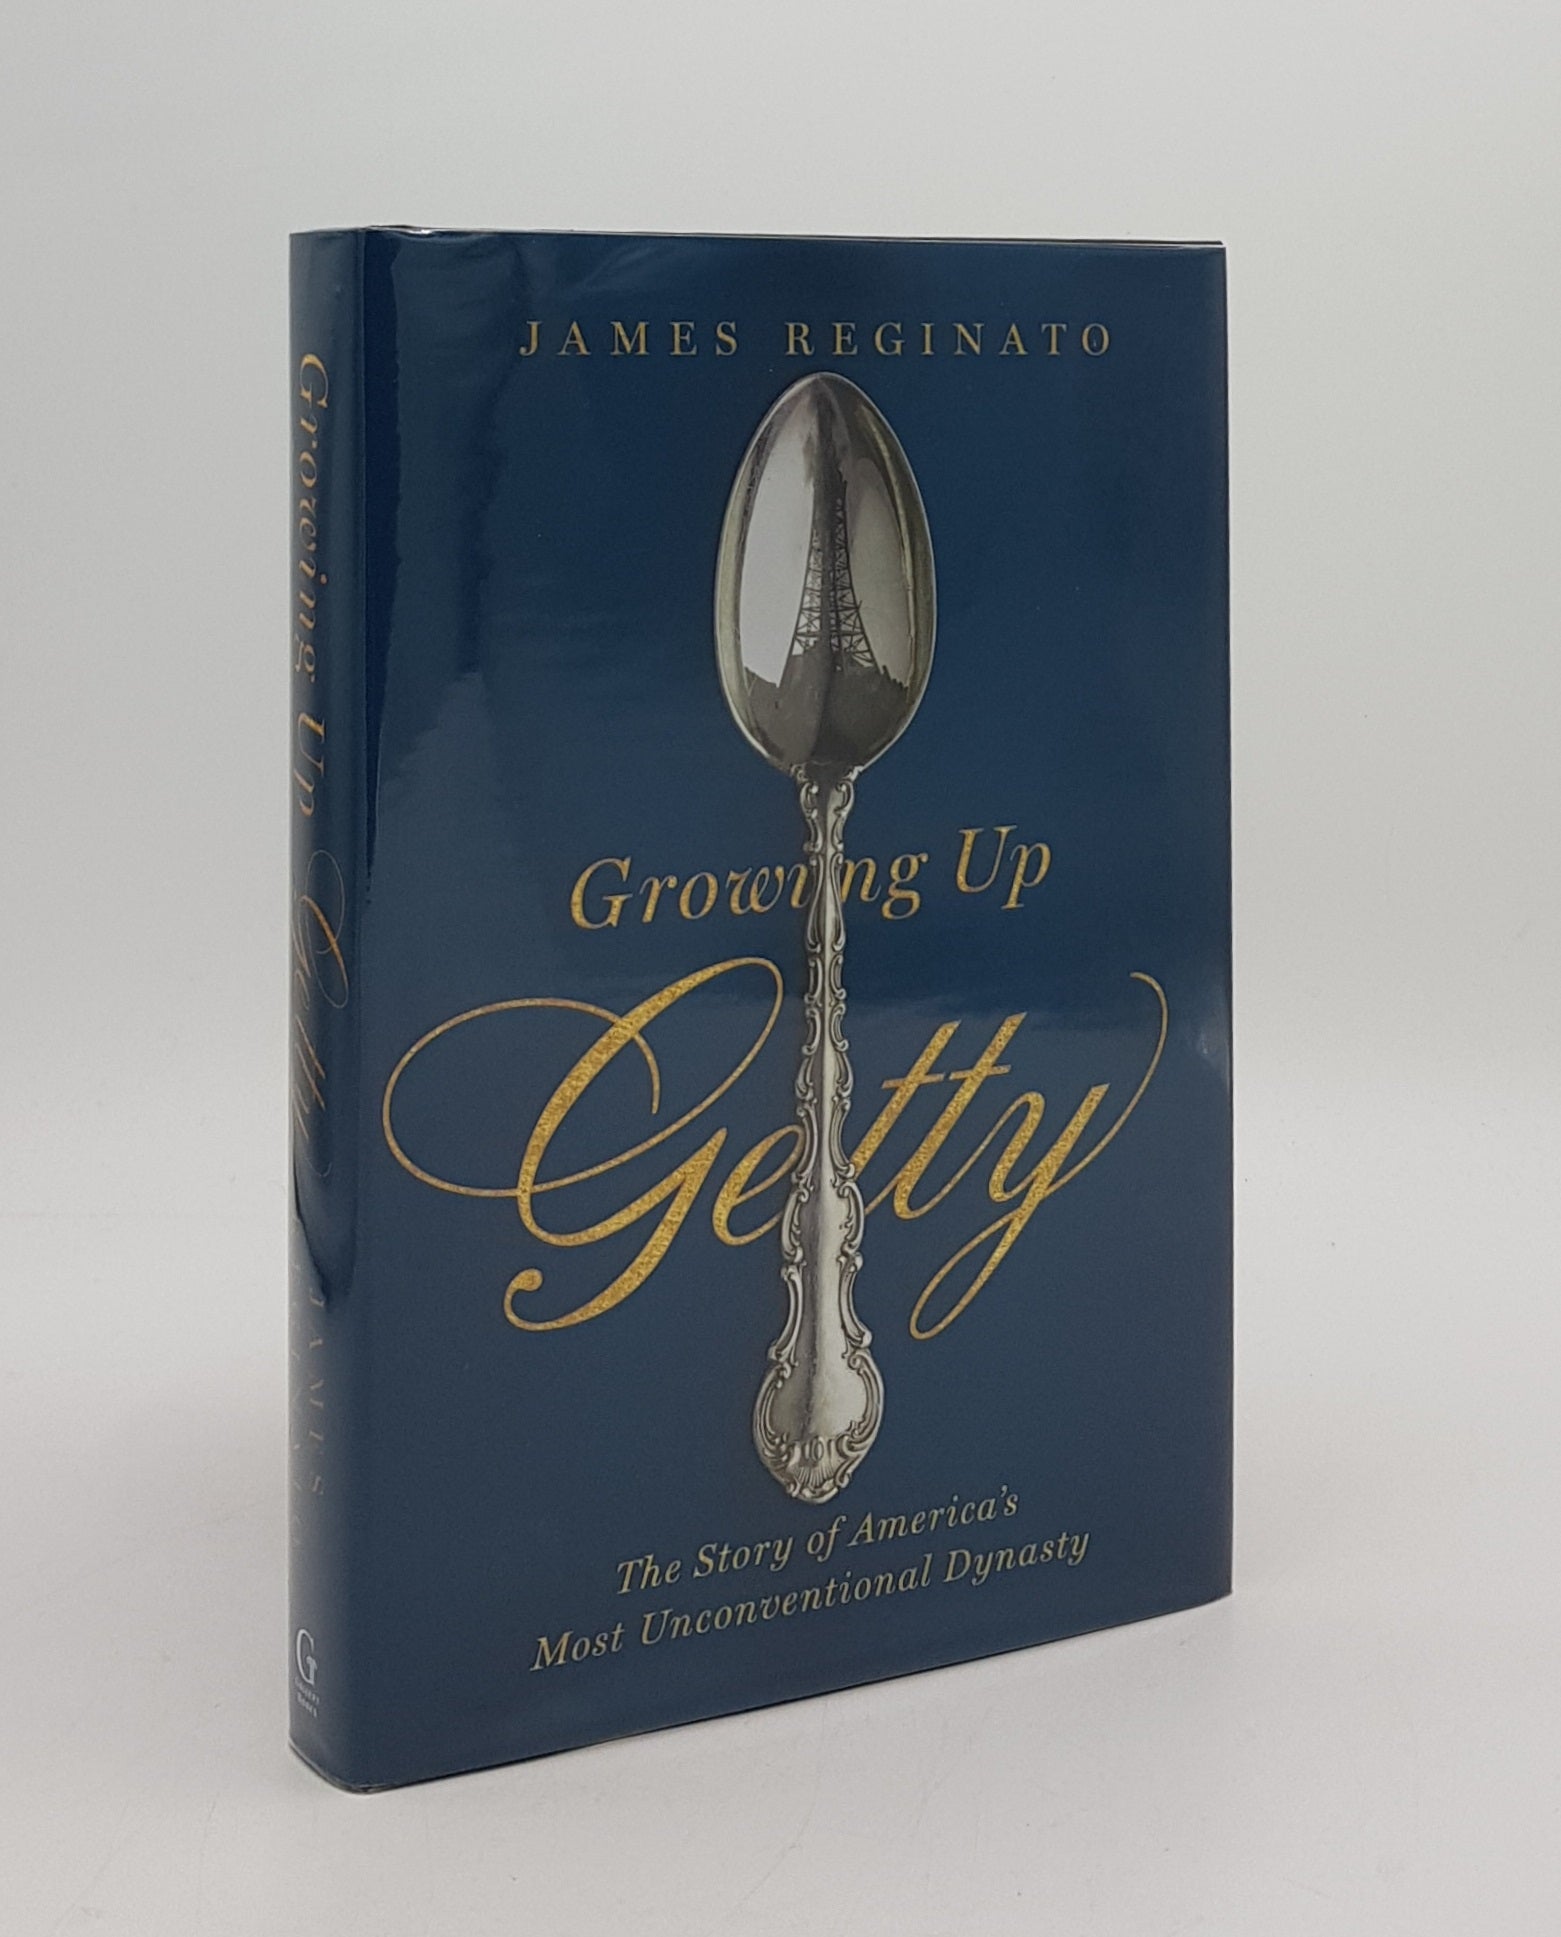 REGINATO James - Growning Up Getty the Story of America's Most Unconventional Dynasty